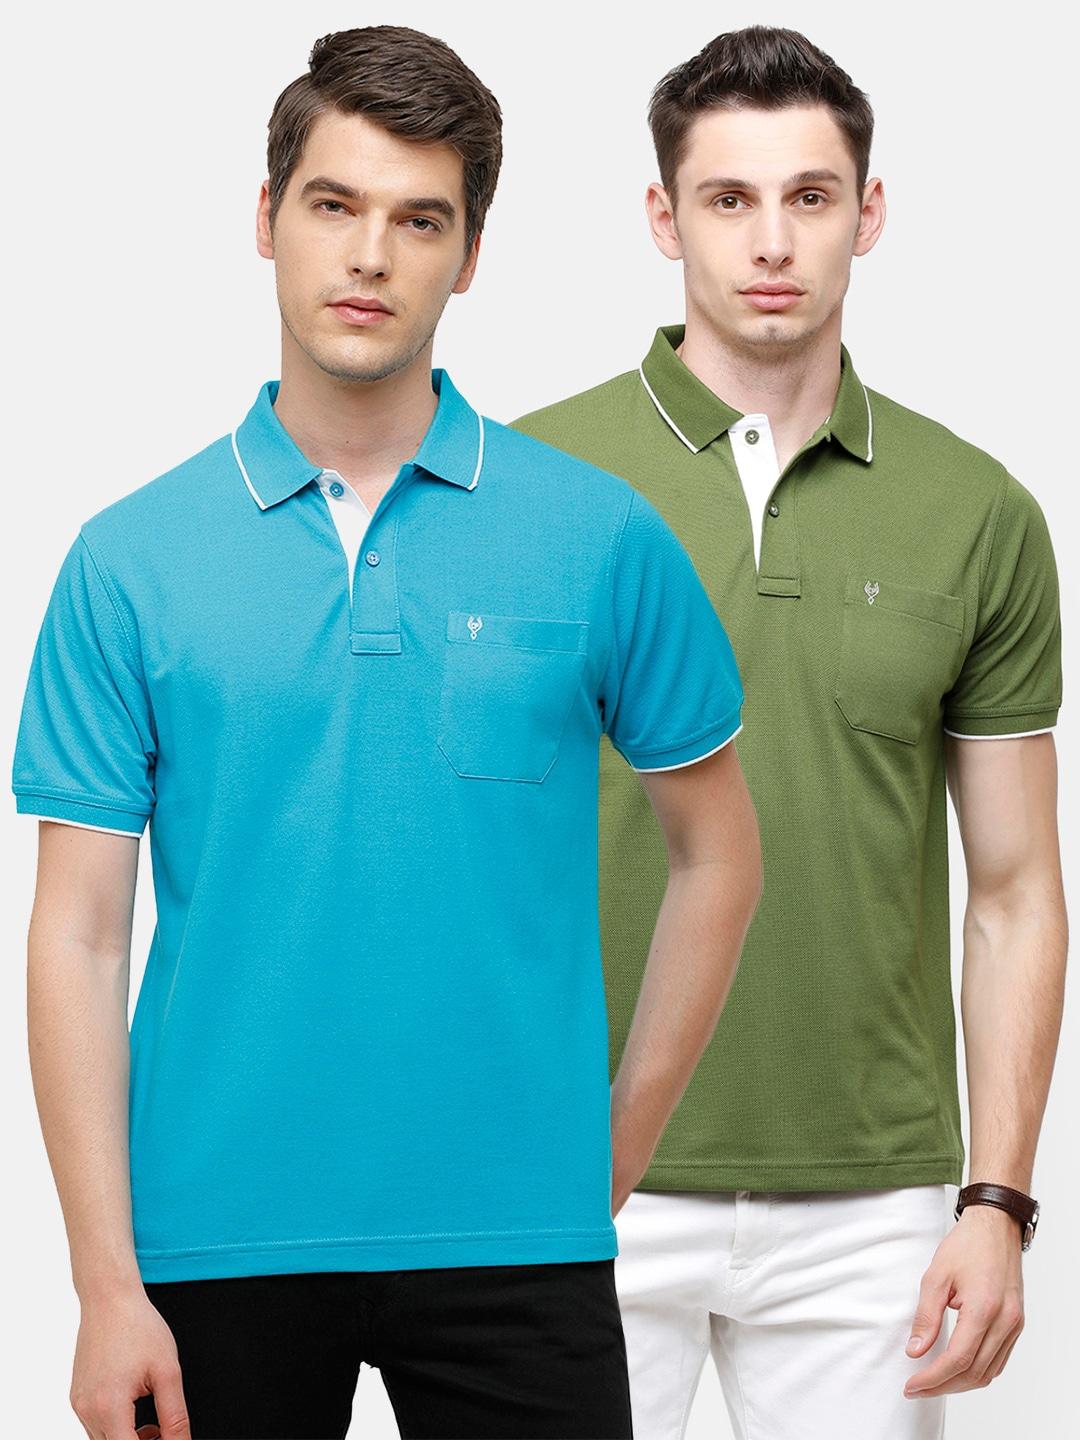 classic polo men pack of 2 turquoise blue & green polo collar t-shirts